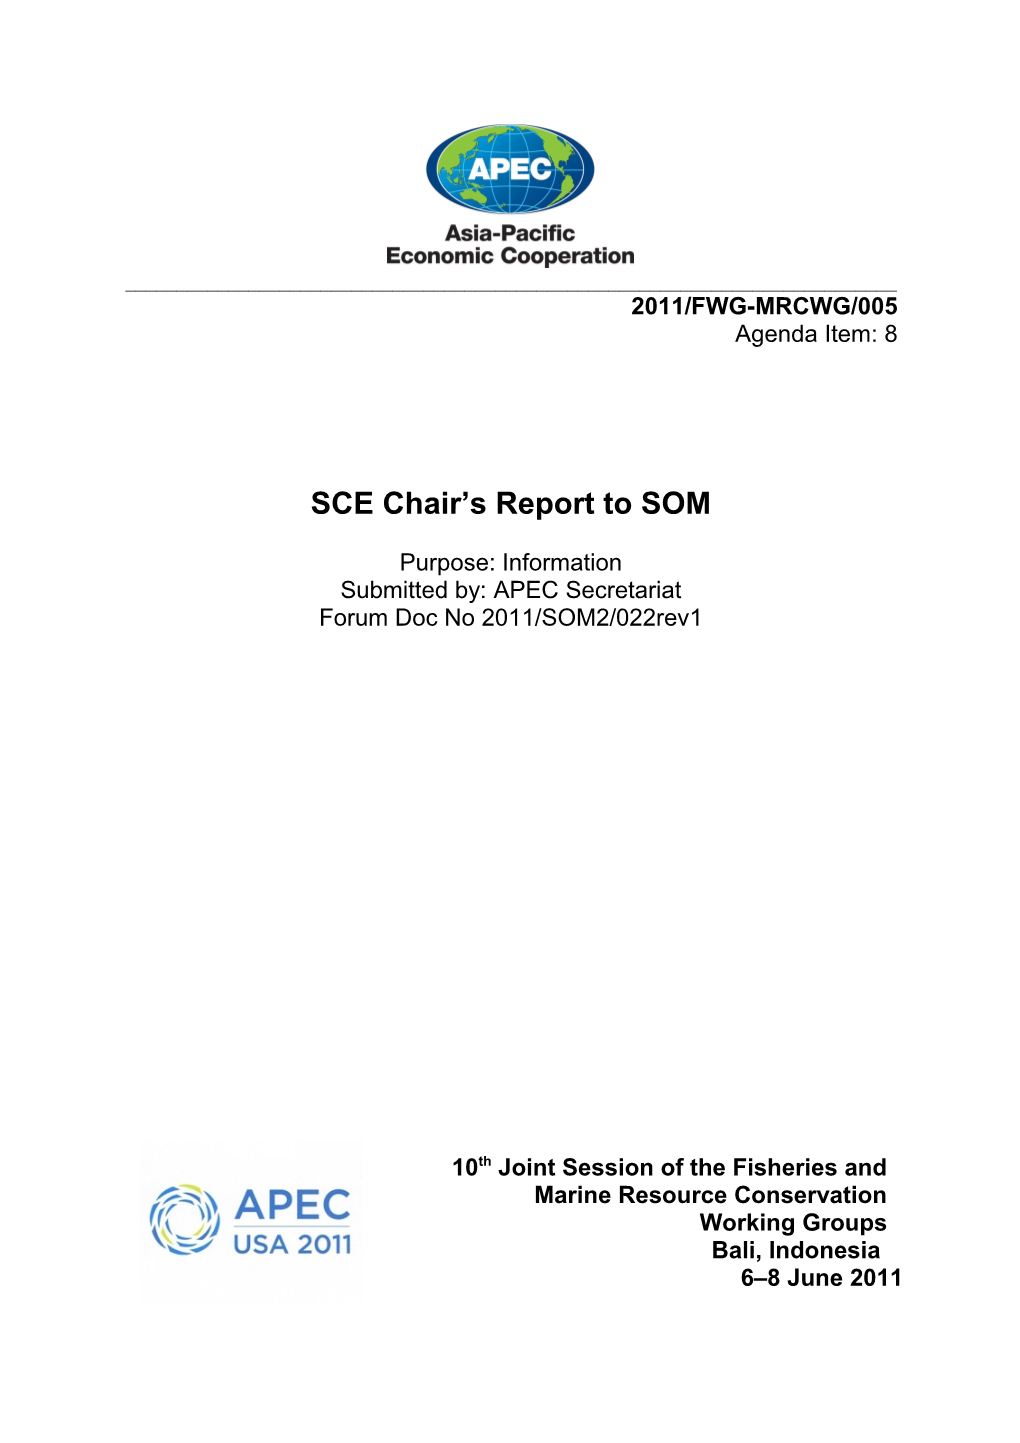 SCE Chair S Report to SOM